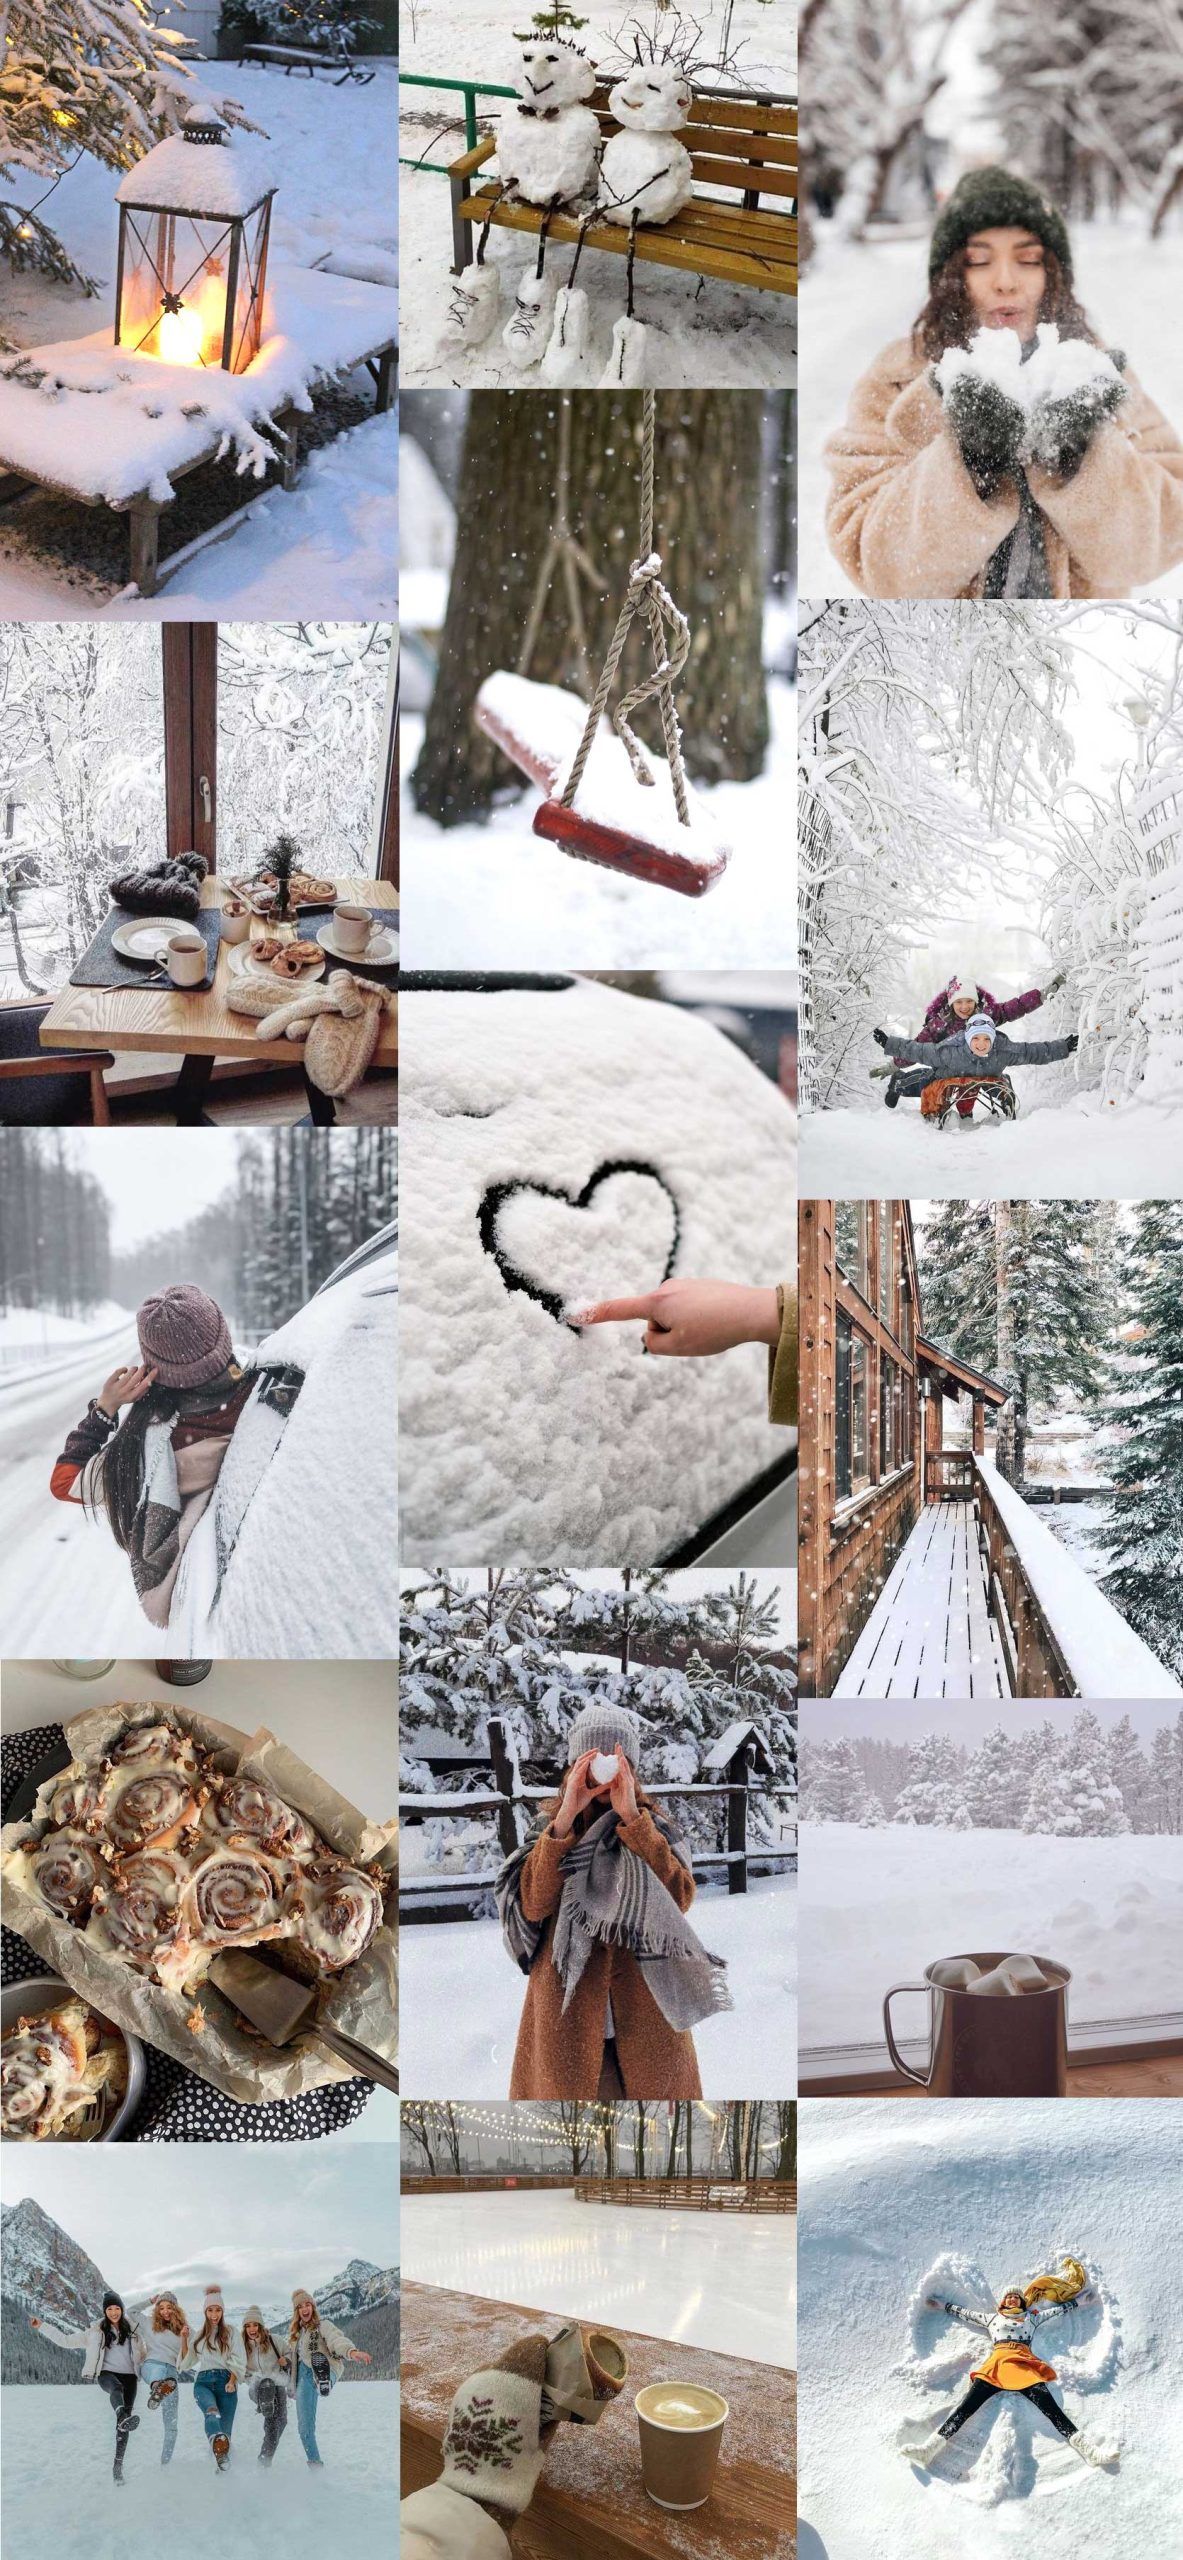 A collage of pictures showing people in the snow - Collage, snow, winter